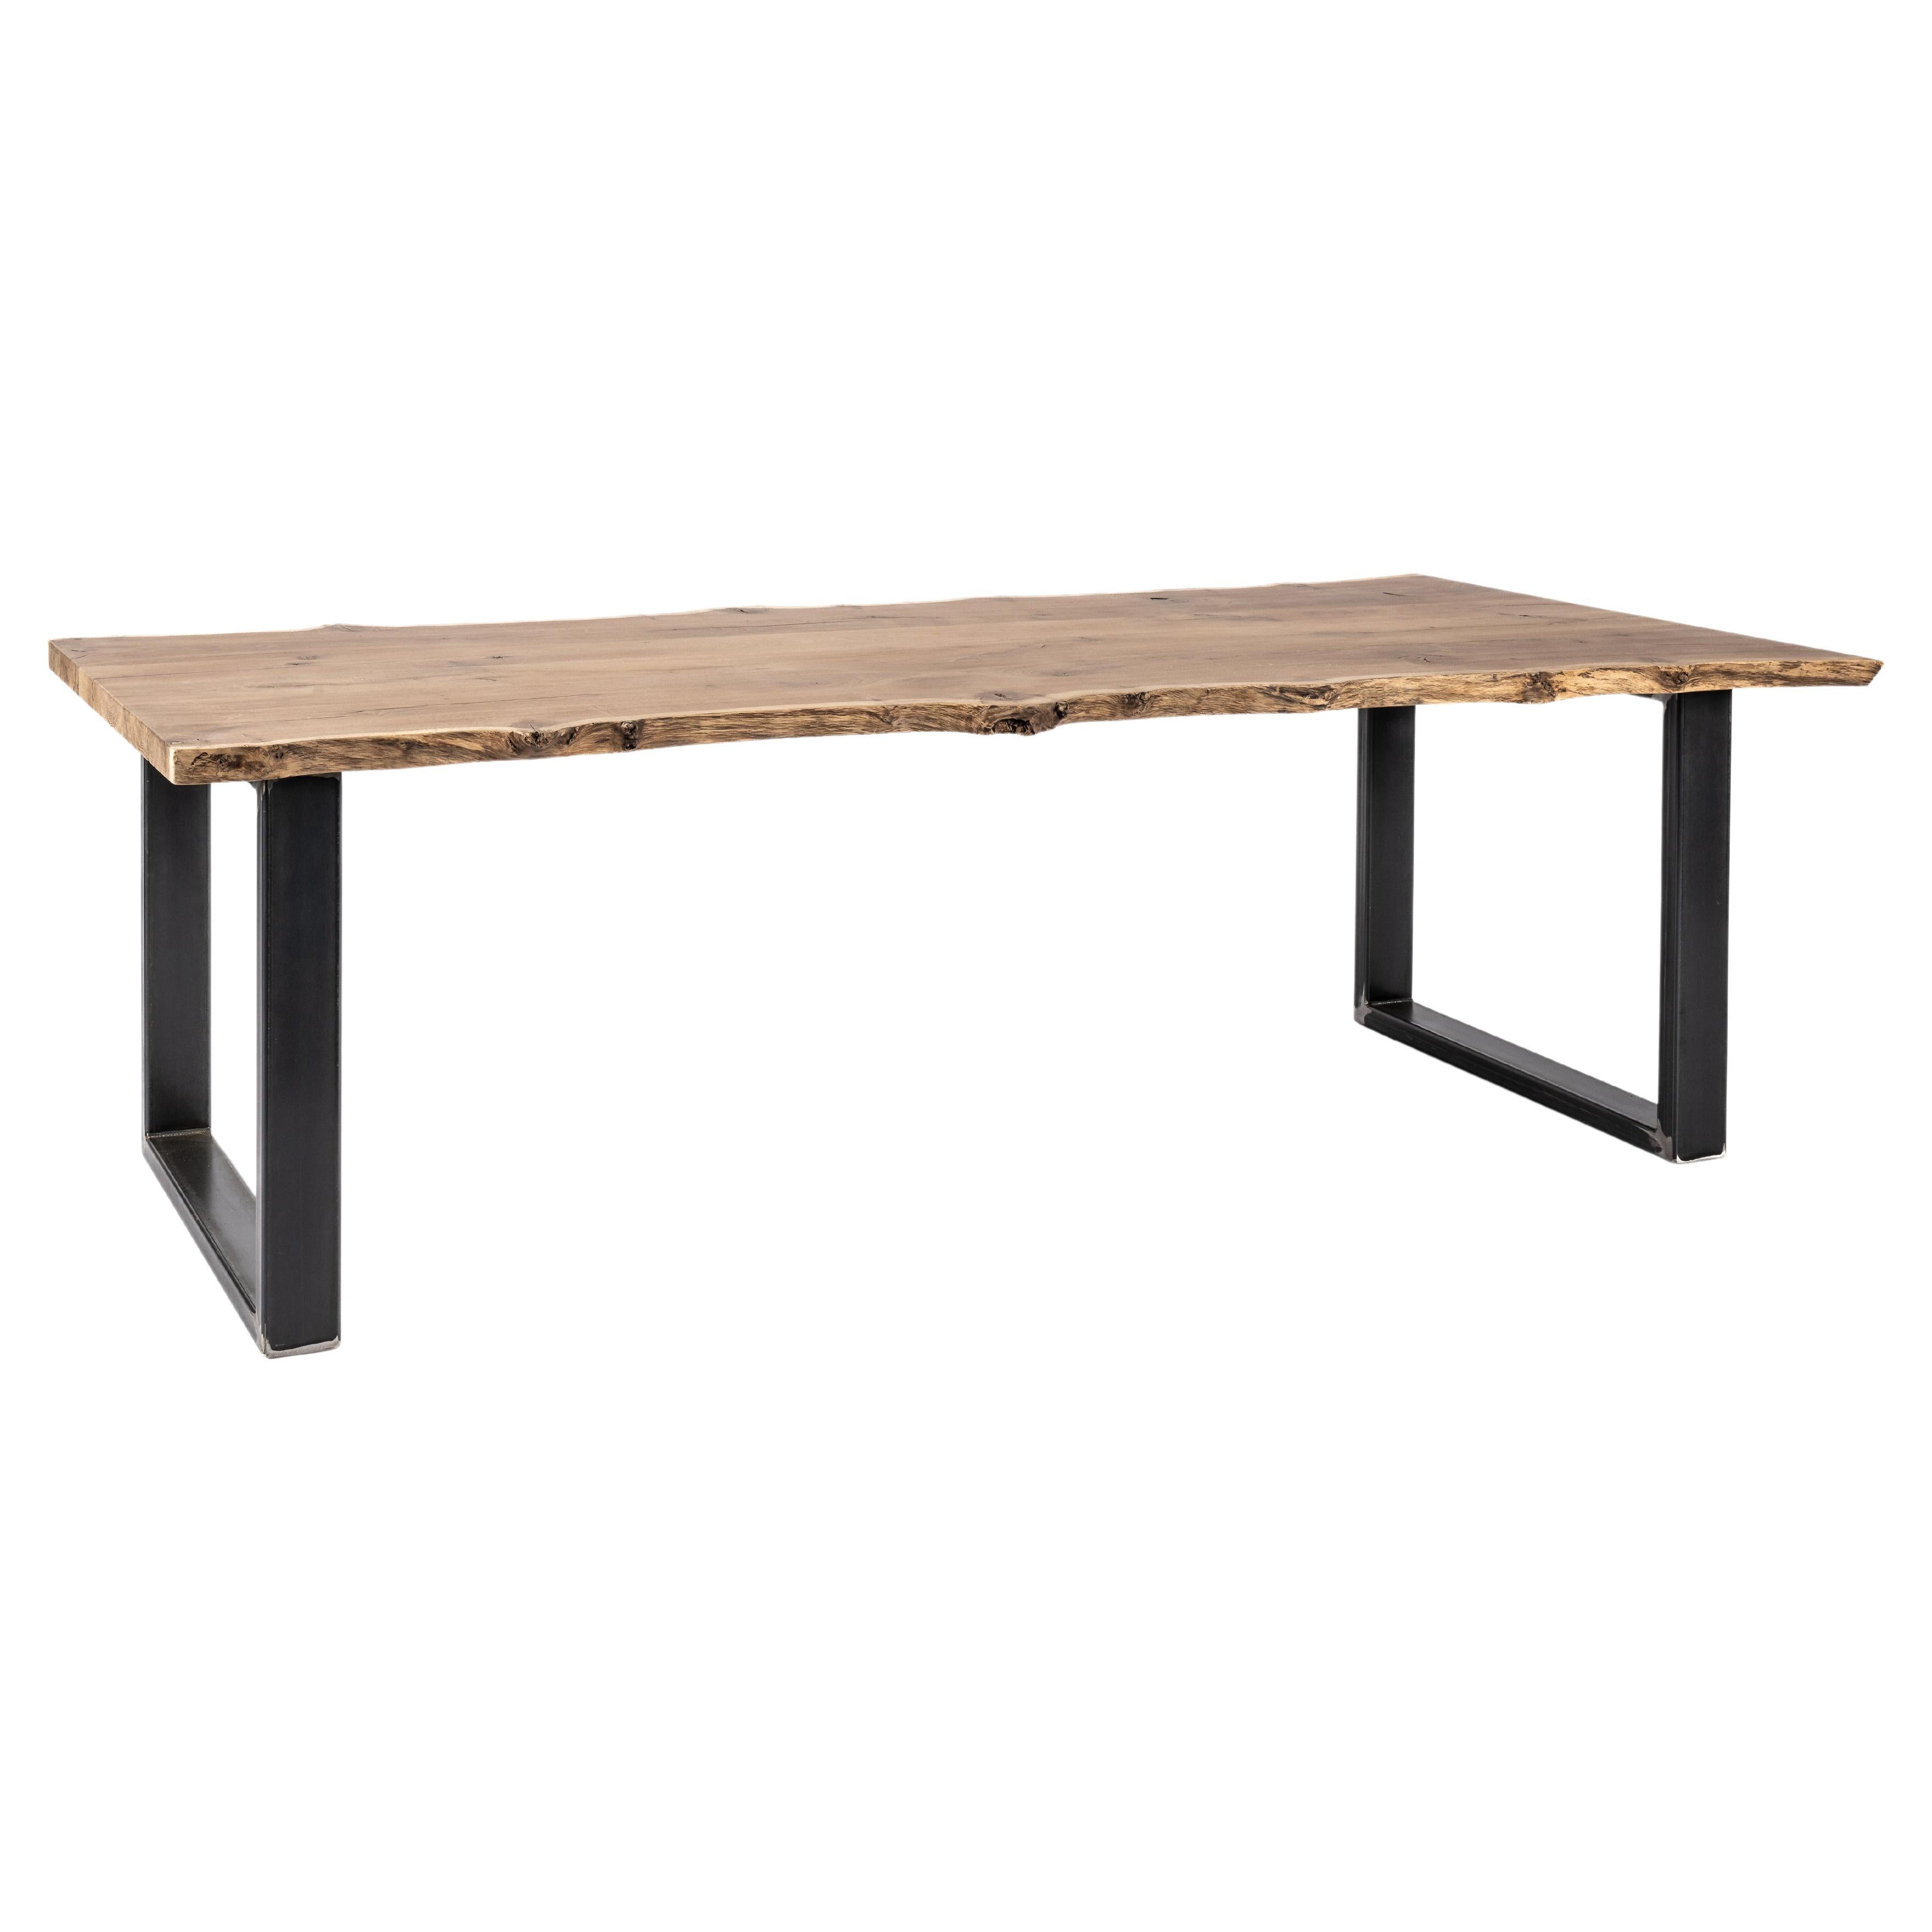 Unique solid aged pippi oak live edge dining table with matte finish